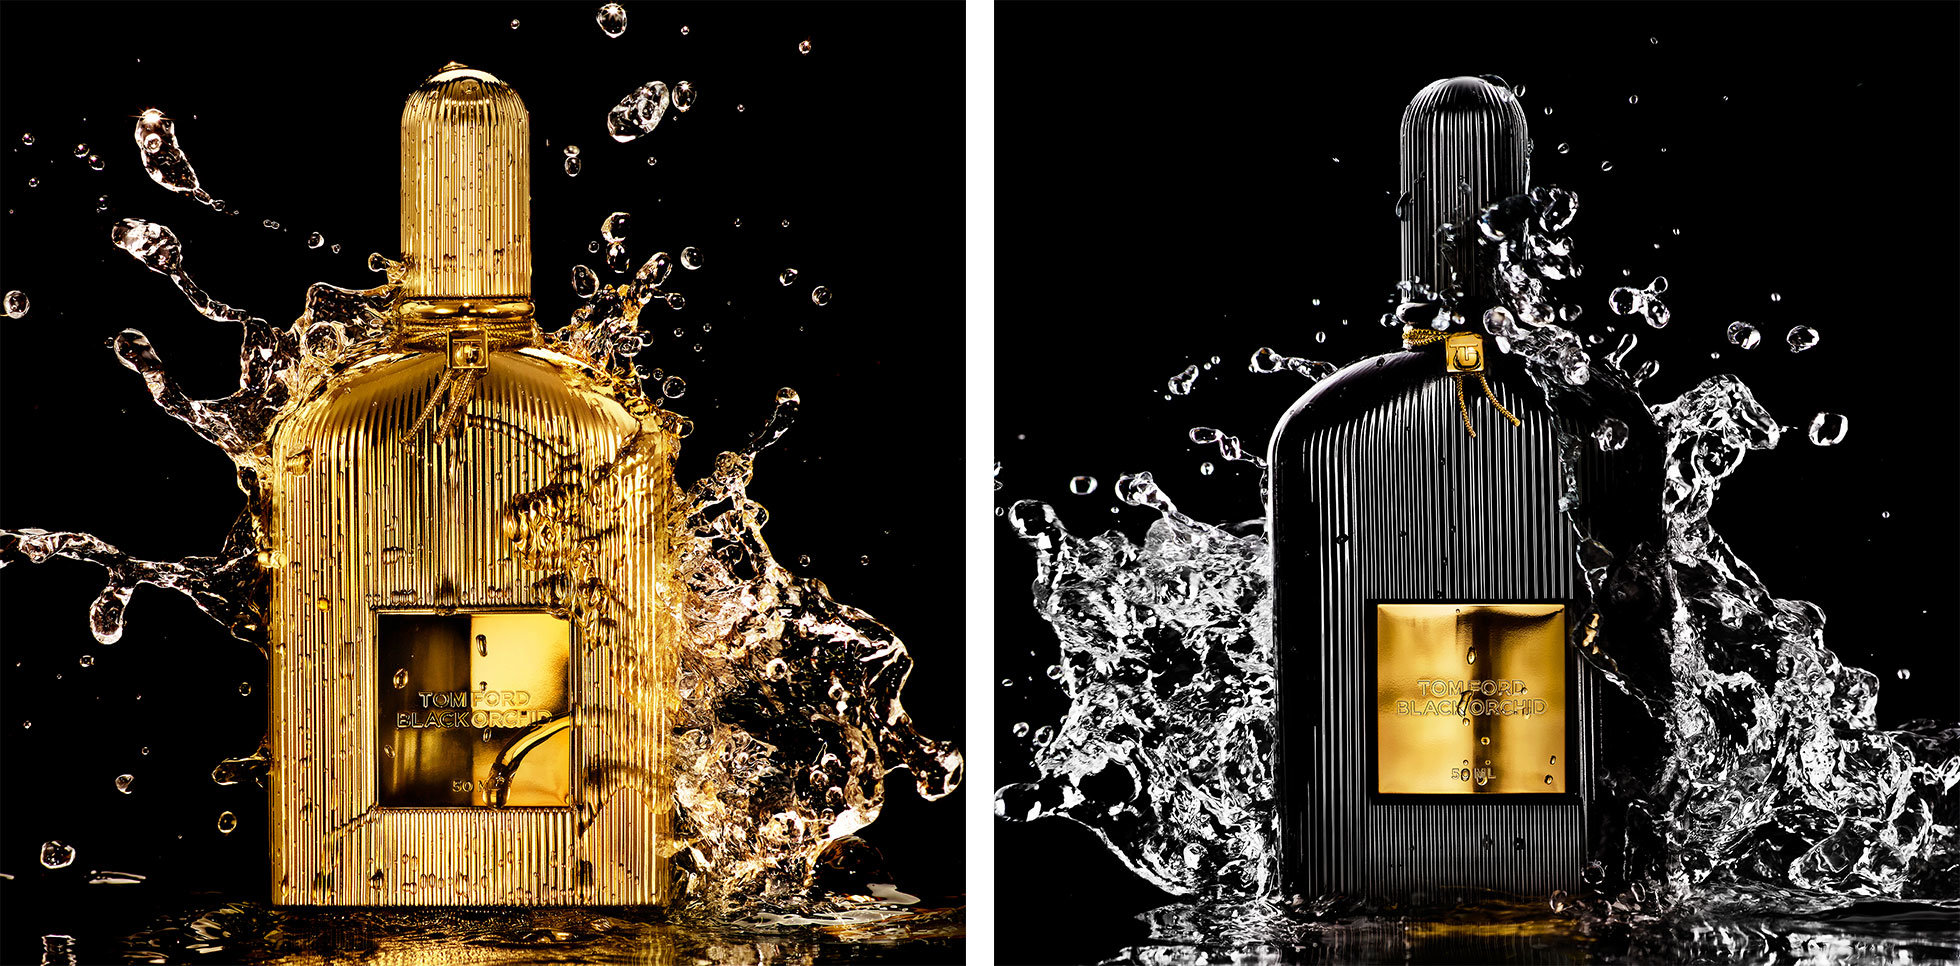 TOM FORD - Traditionally a nuanced element in perfumery. TOM